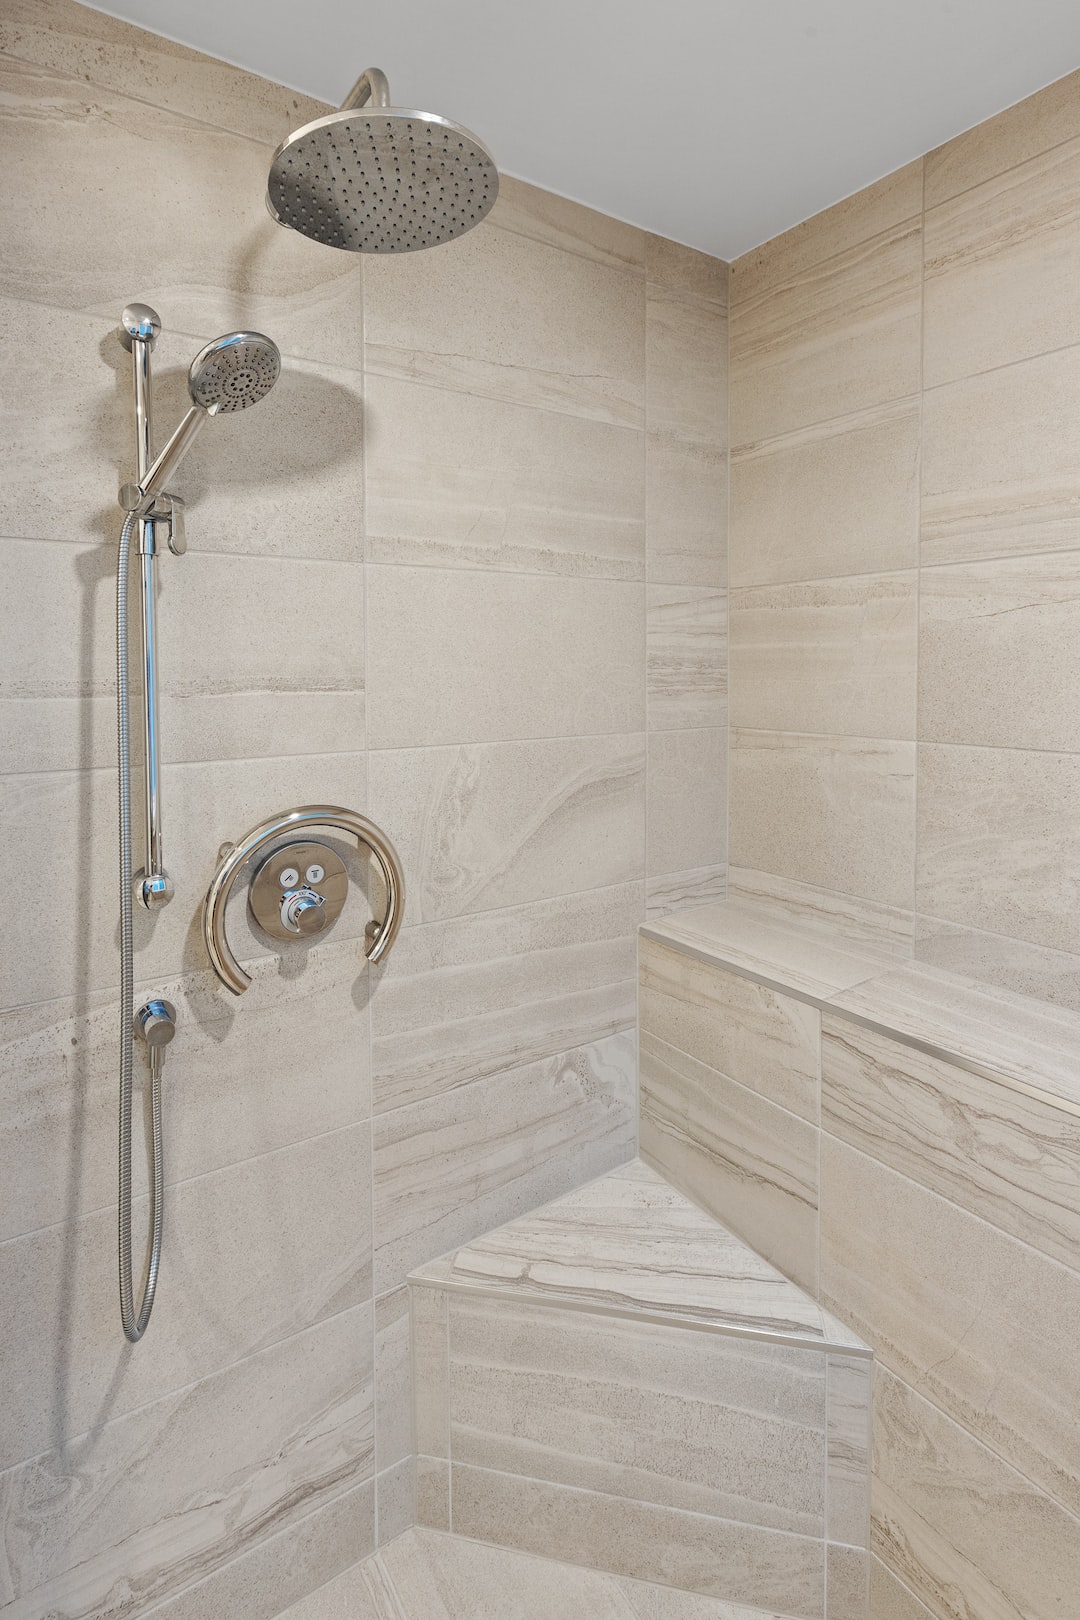 How to Replace a Shower Faucet in Sapulpa, OK